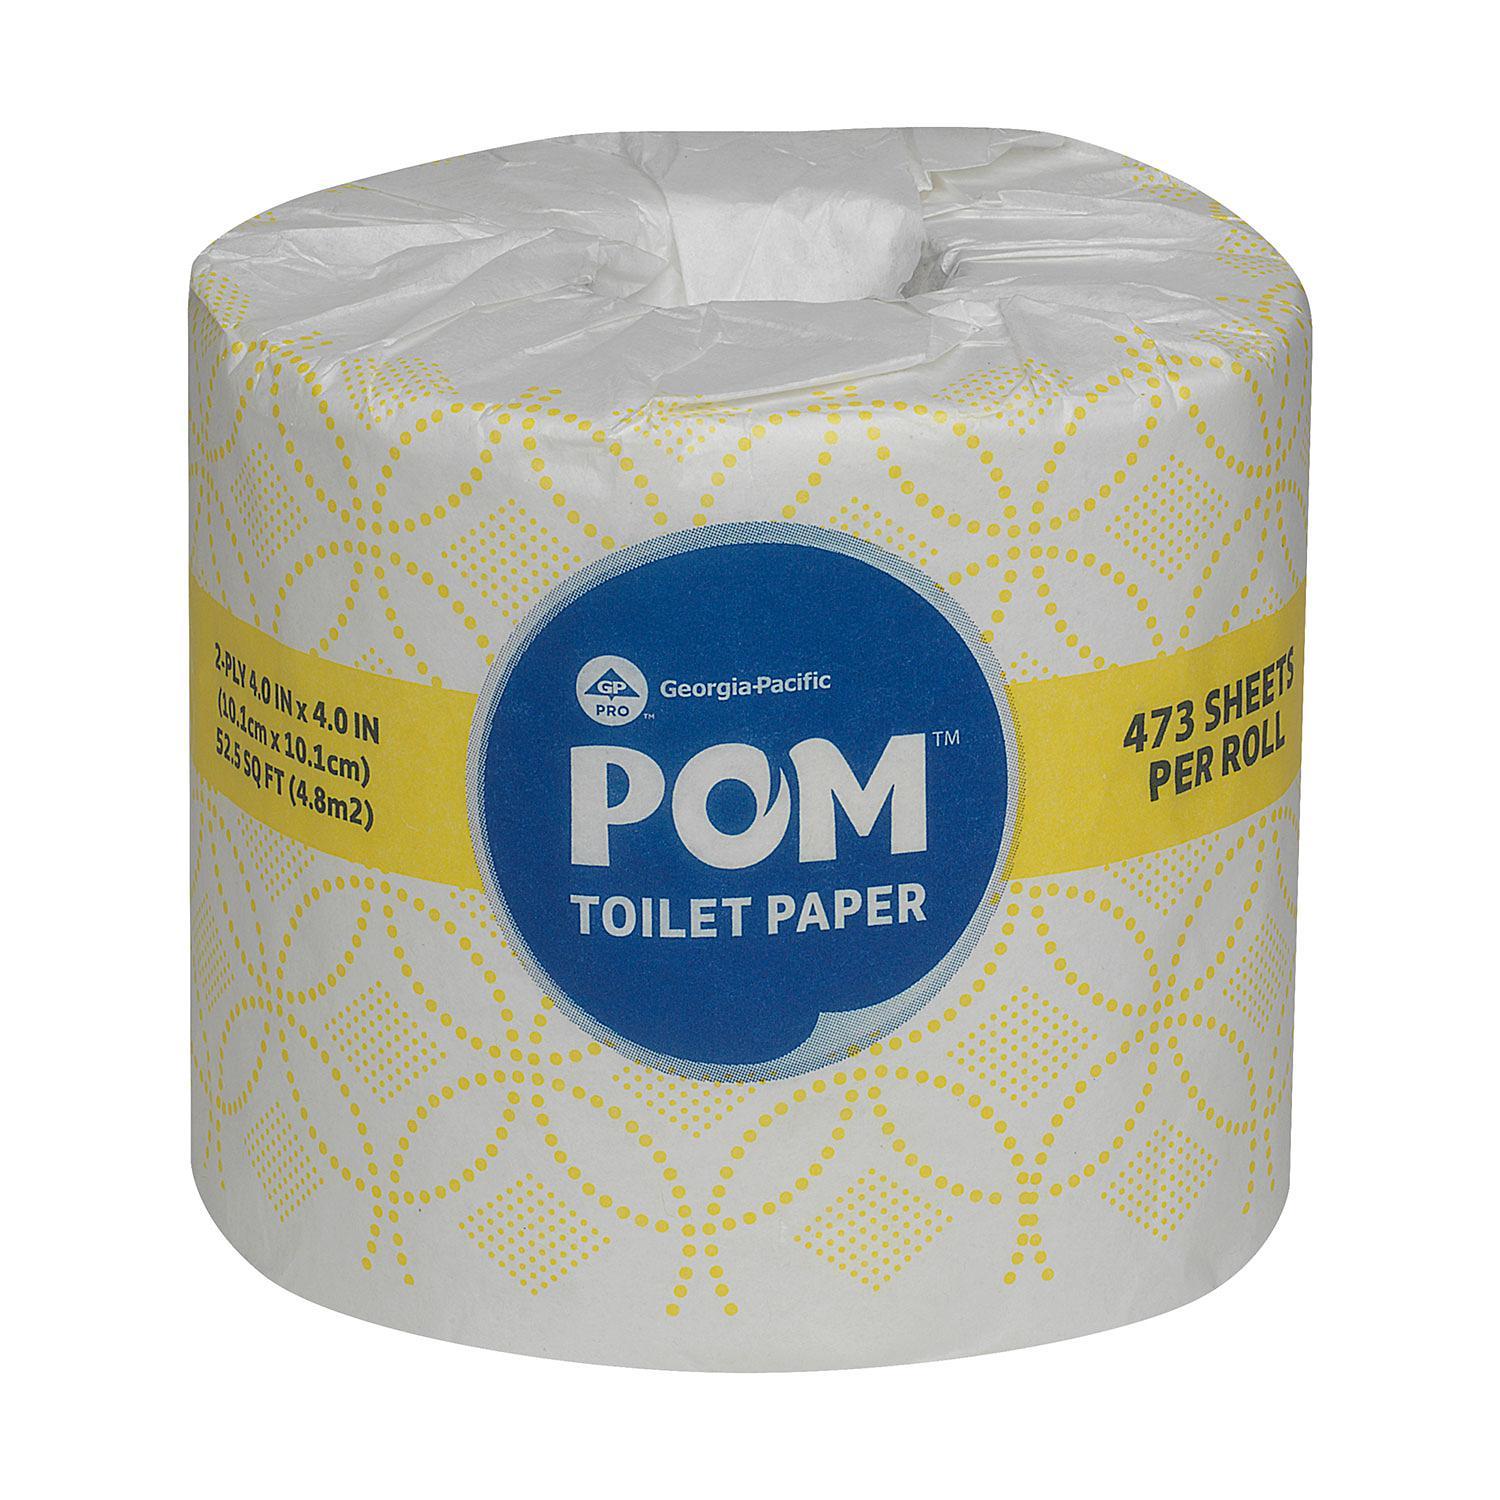 POM Embossed 2-Ply Toilet Paper by Georgia-Pacific, White (473 sheets ...